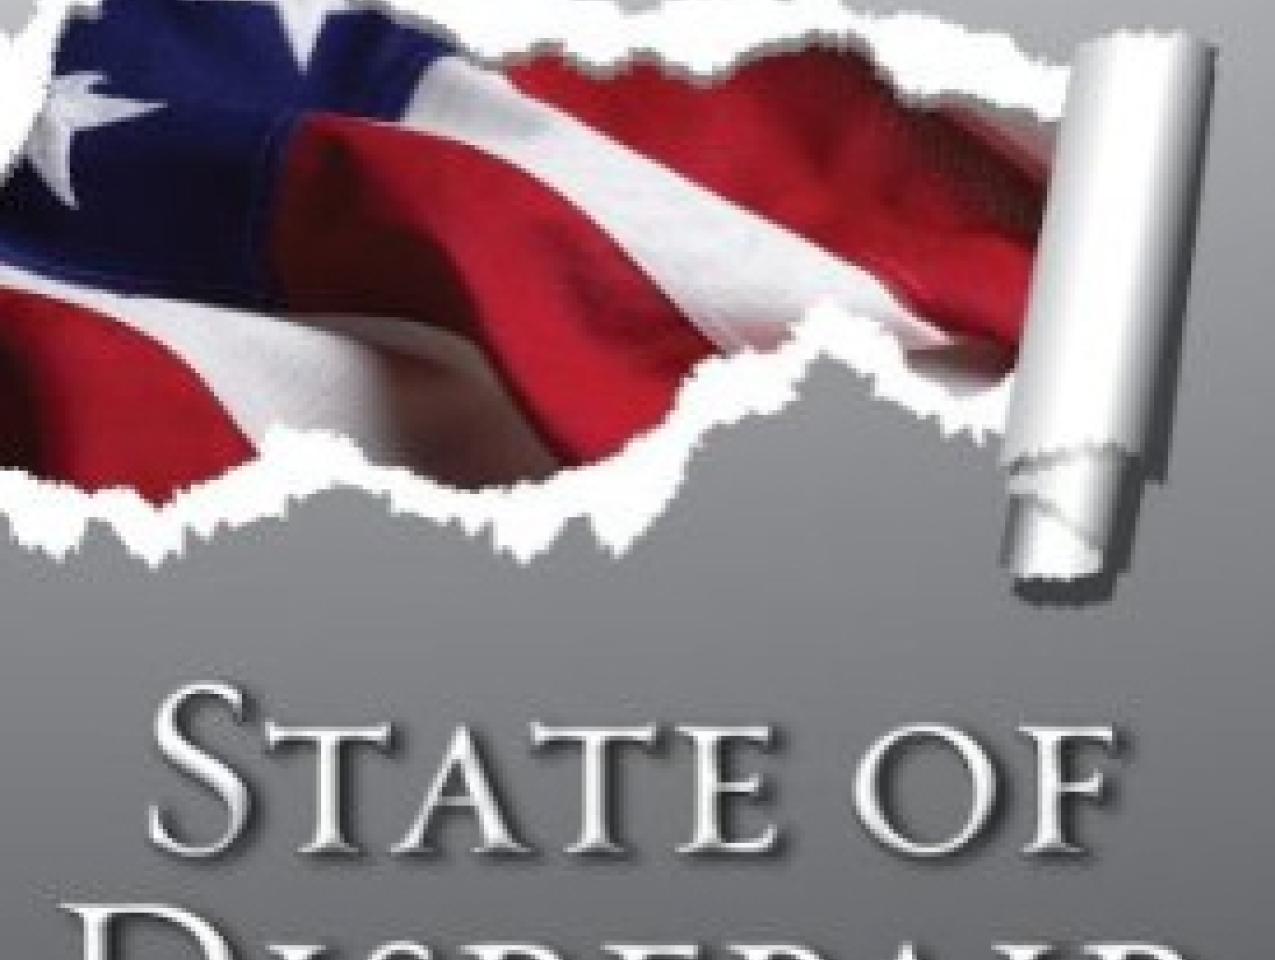 State of Disrepair: Fixing the Culture and Practices of the State Department by 